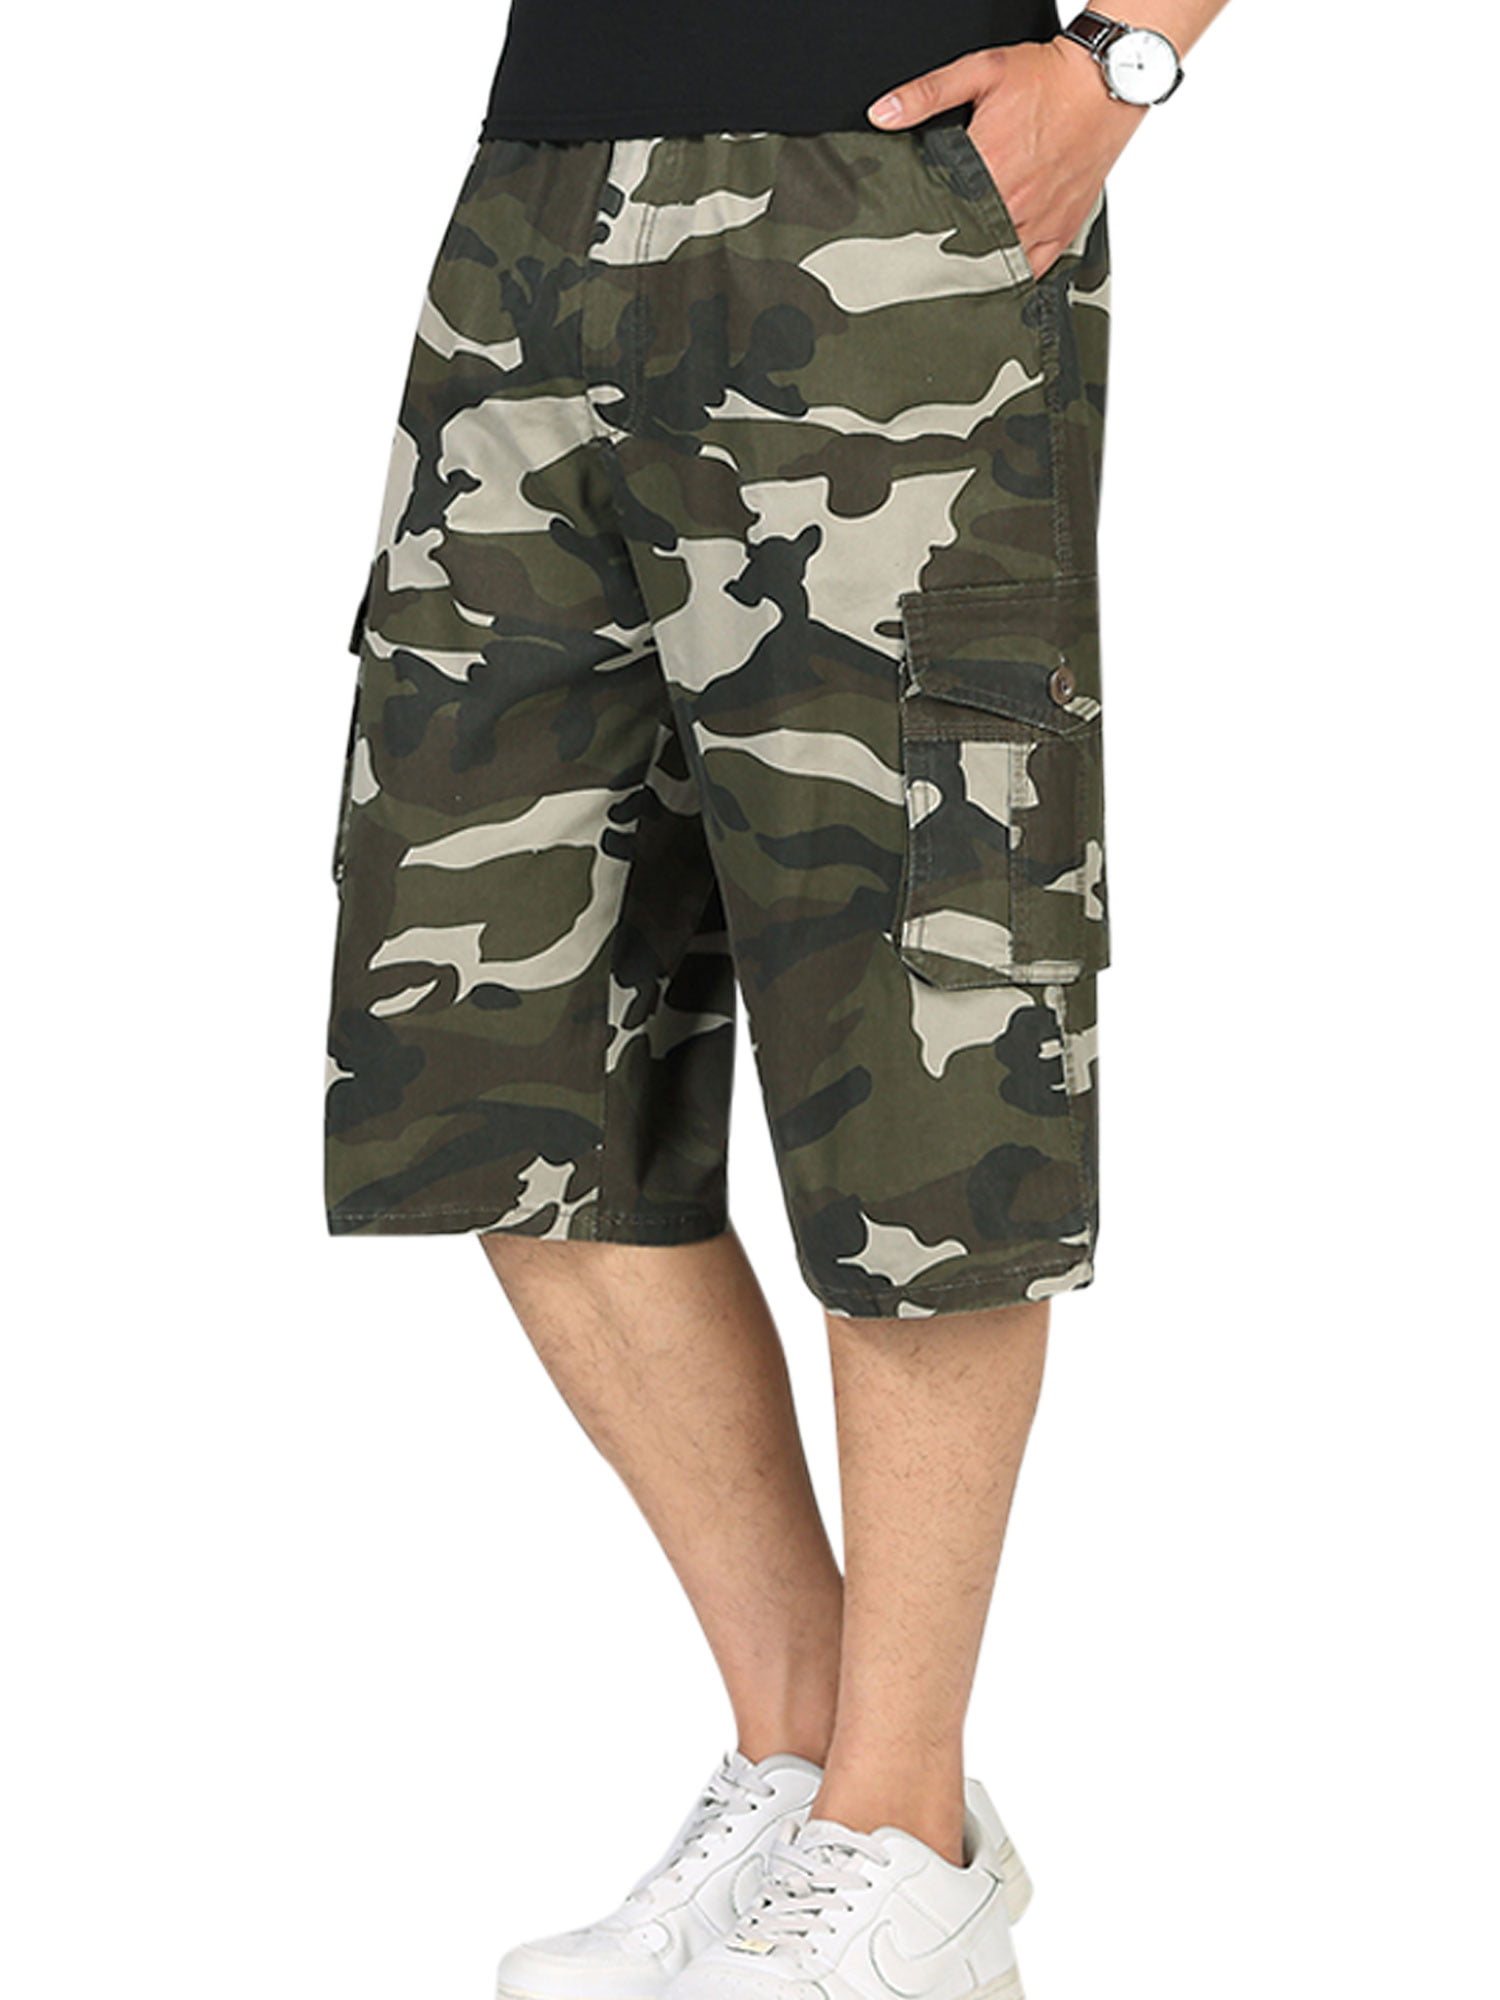 Men's Casual Camo Shorts Combat Short Pants Military Army Cargo Work Trousers